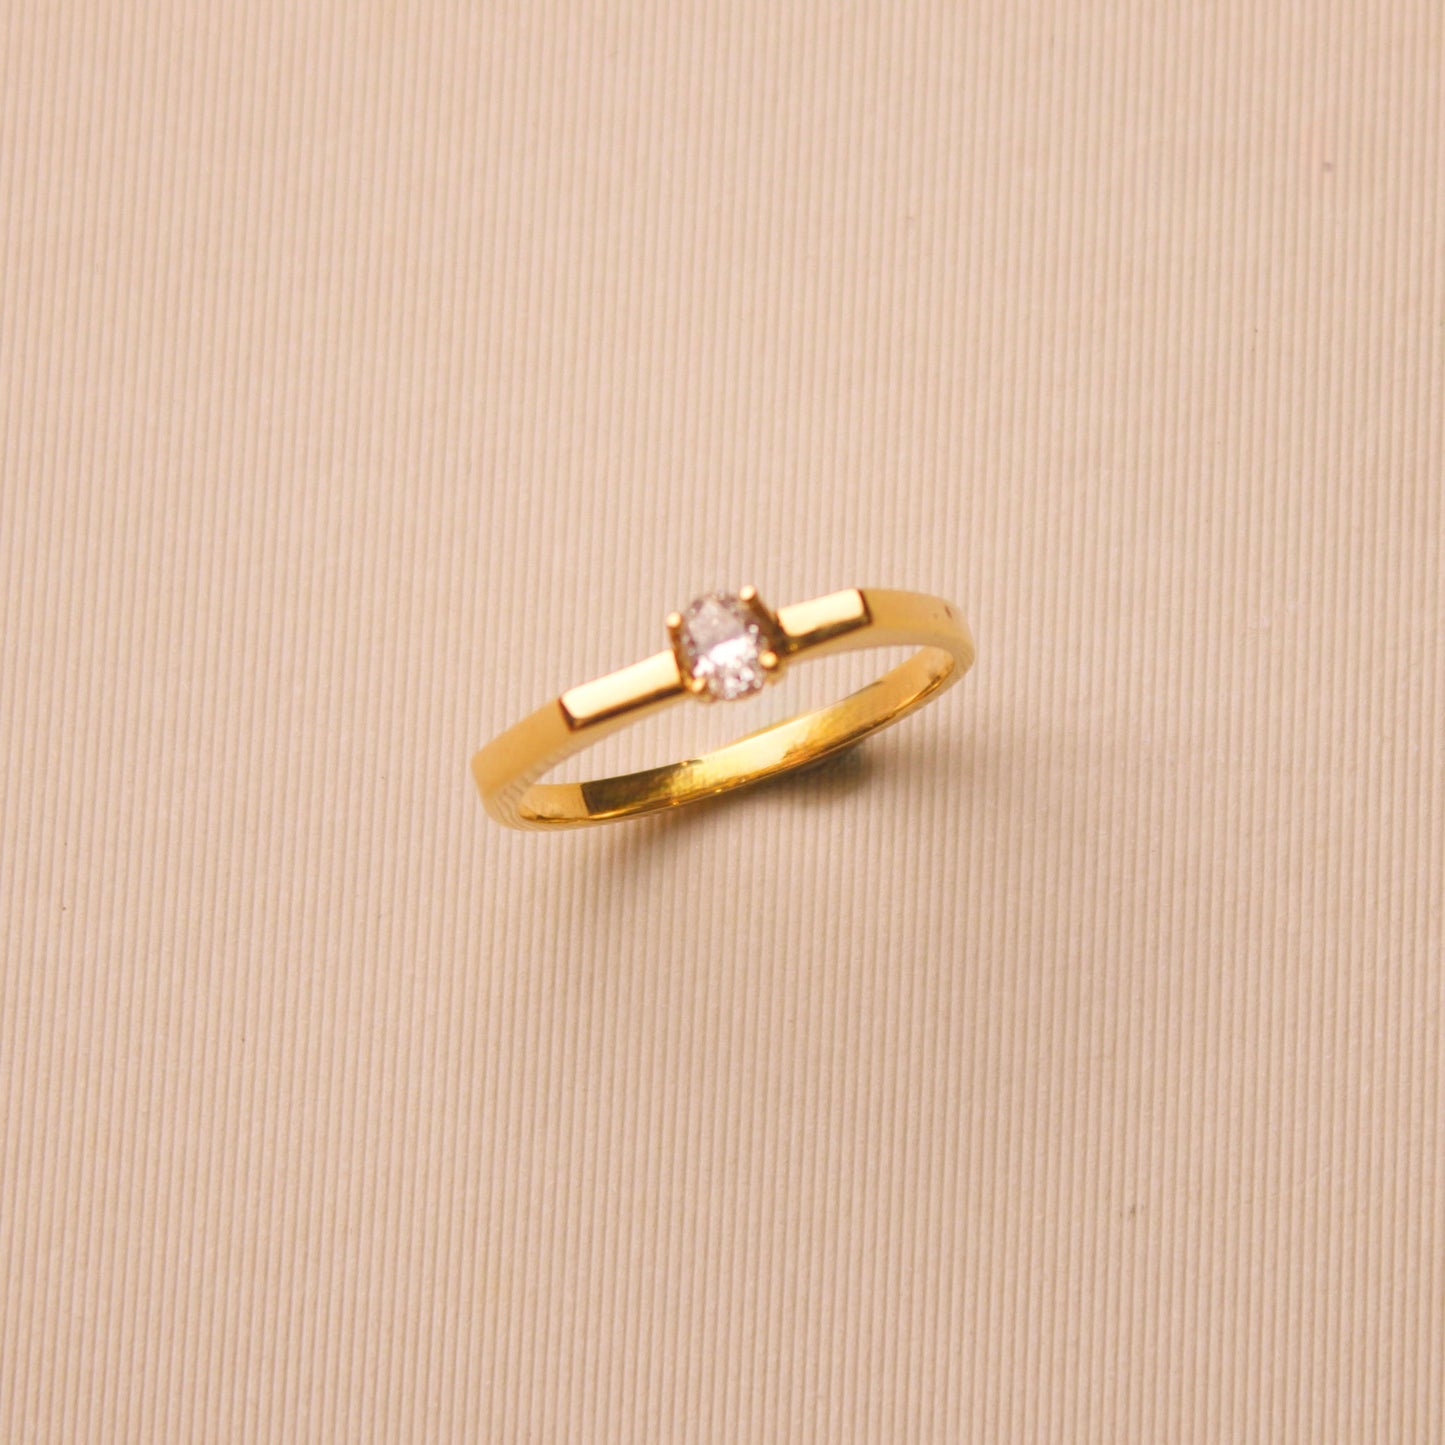 The Edgy Yellow Gold Ring